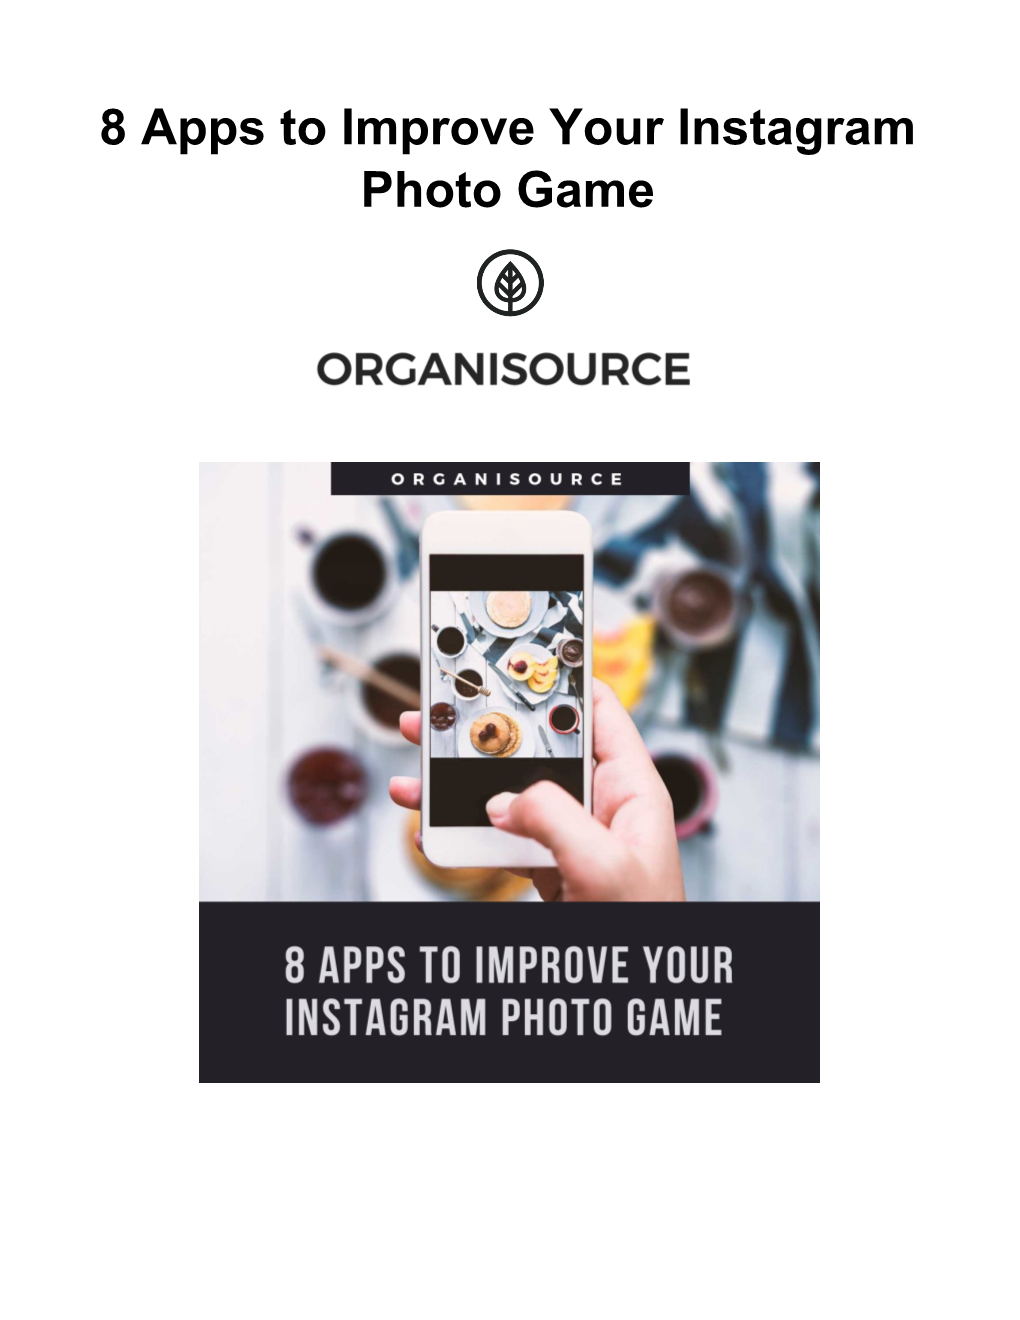 8 Apps to Improve Your Instagram Photo Game